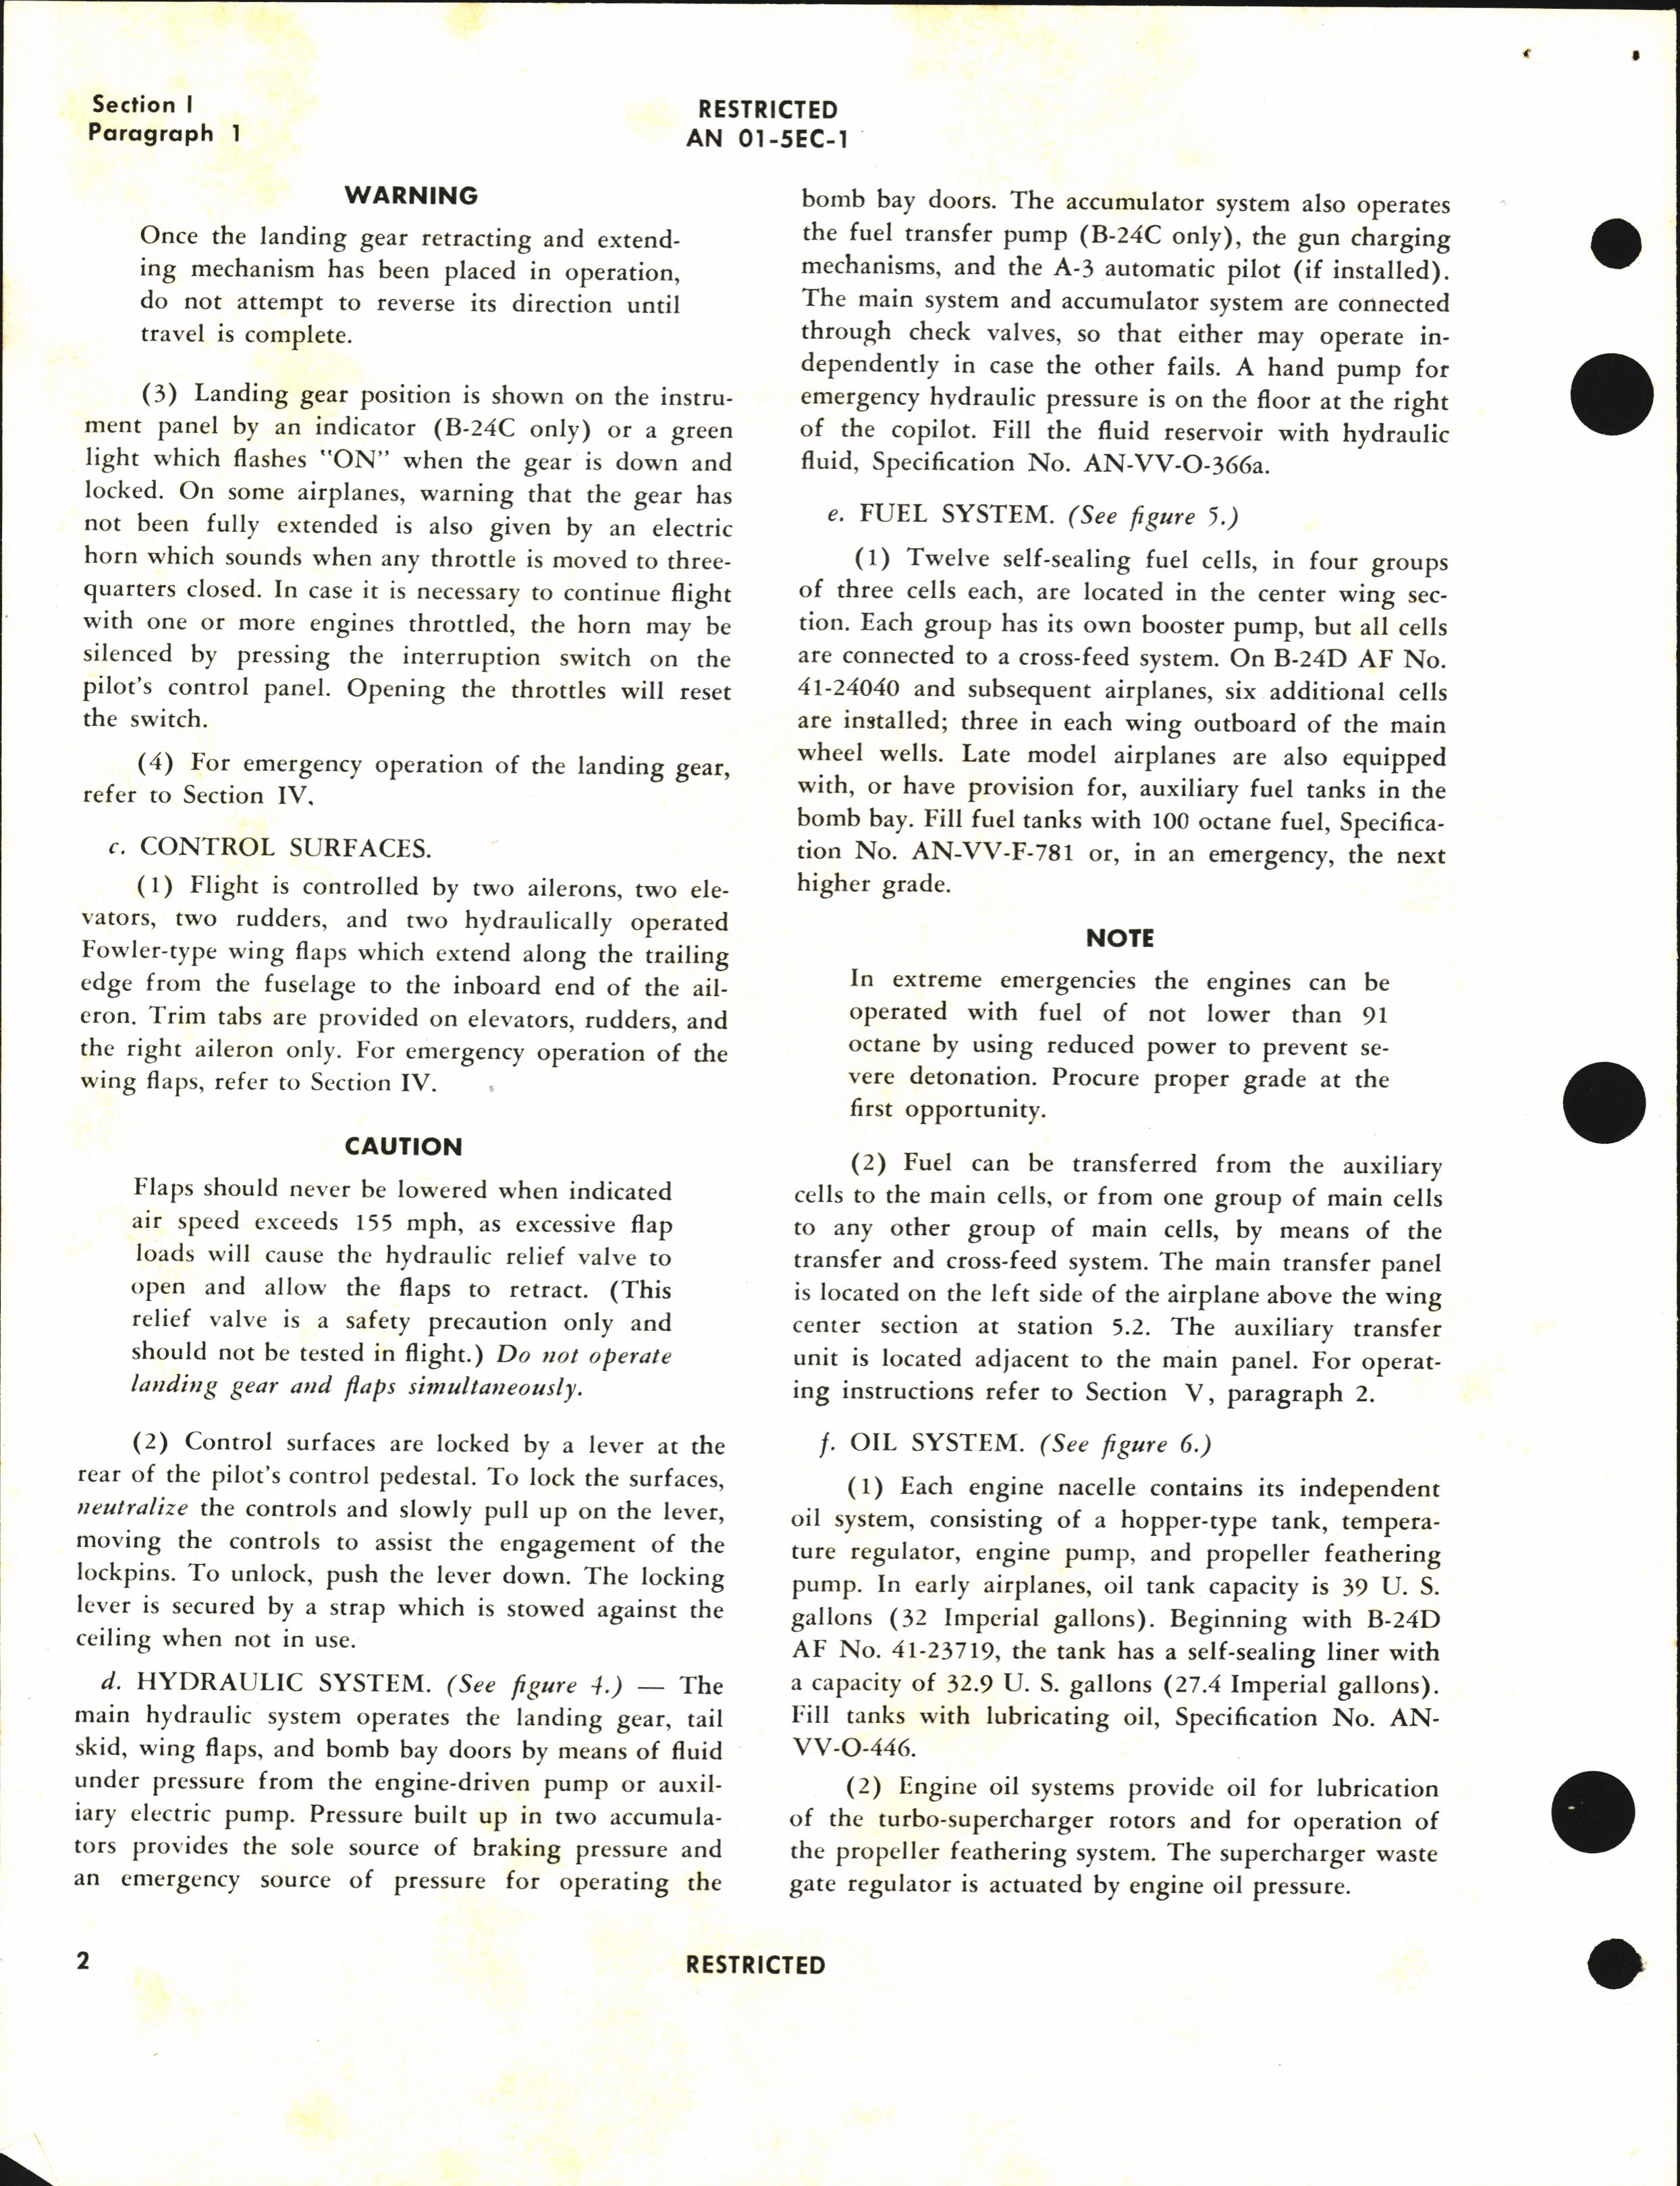 Sample page 6 from AirCorps Library document: Pilot's Flight Operating Instructions for B-24D, E, and RB-24C